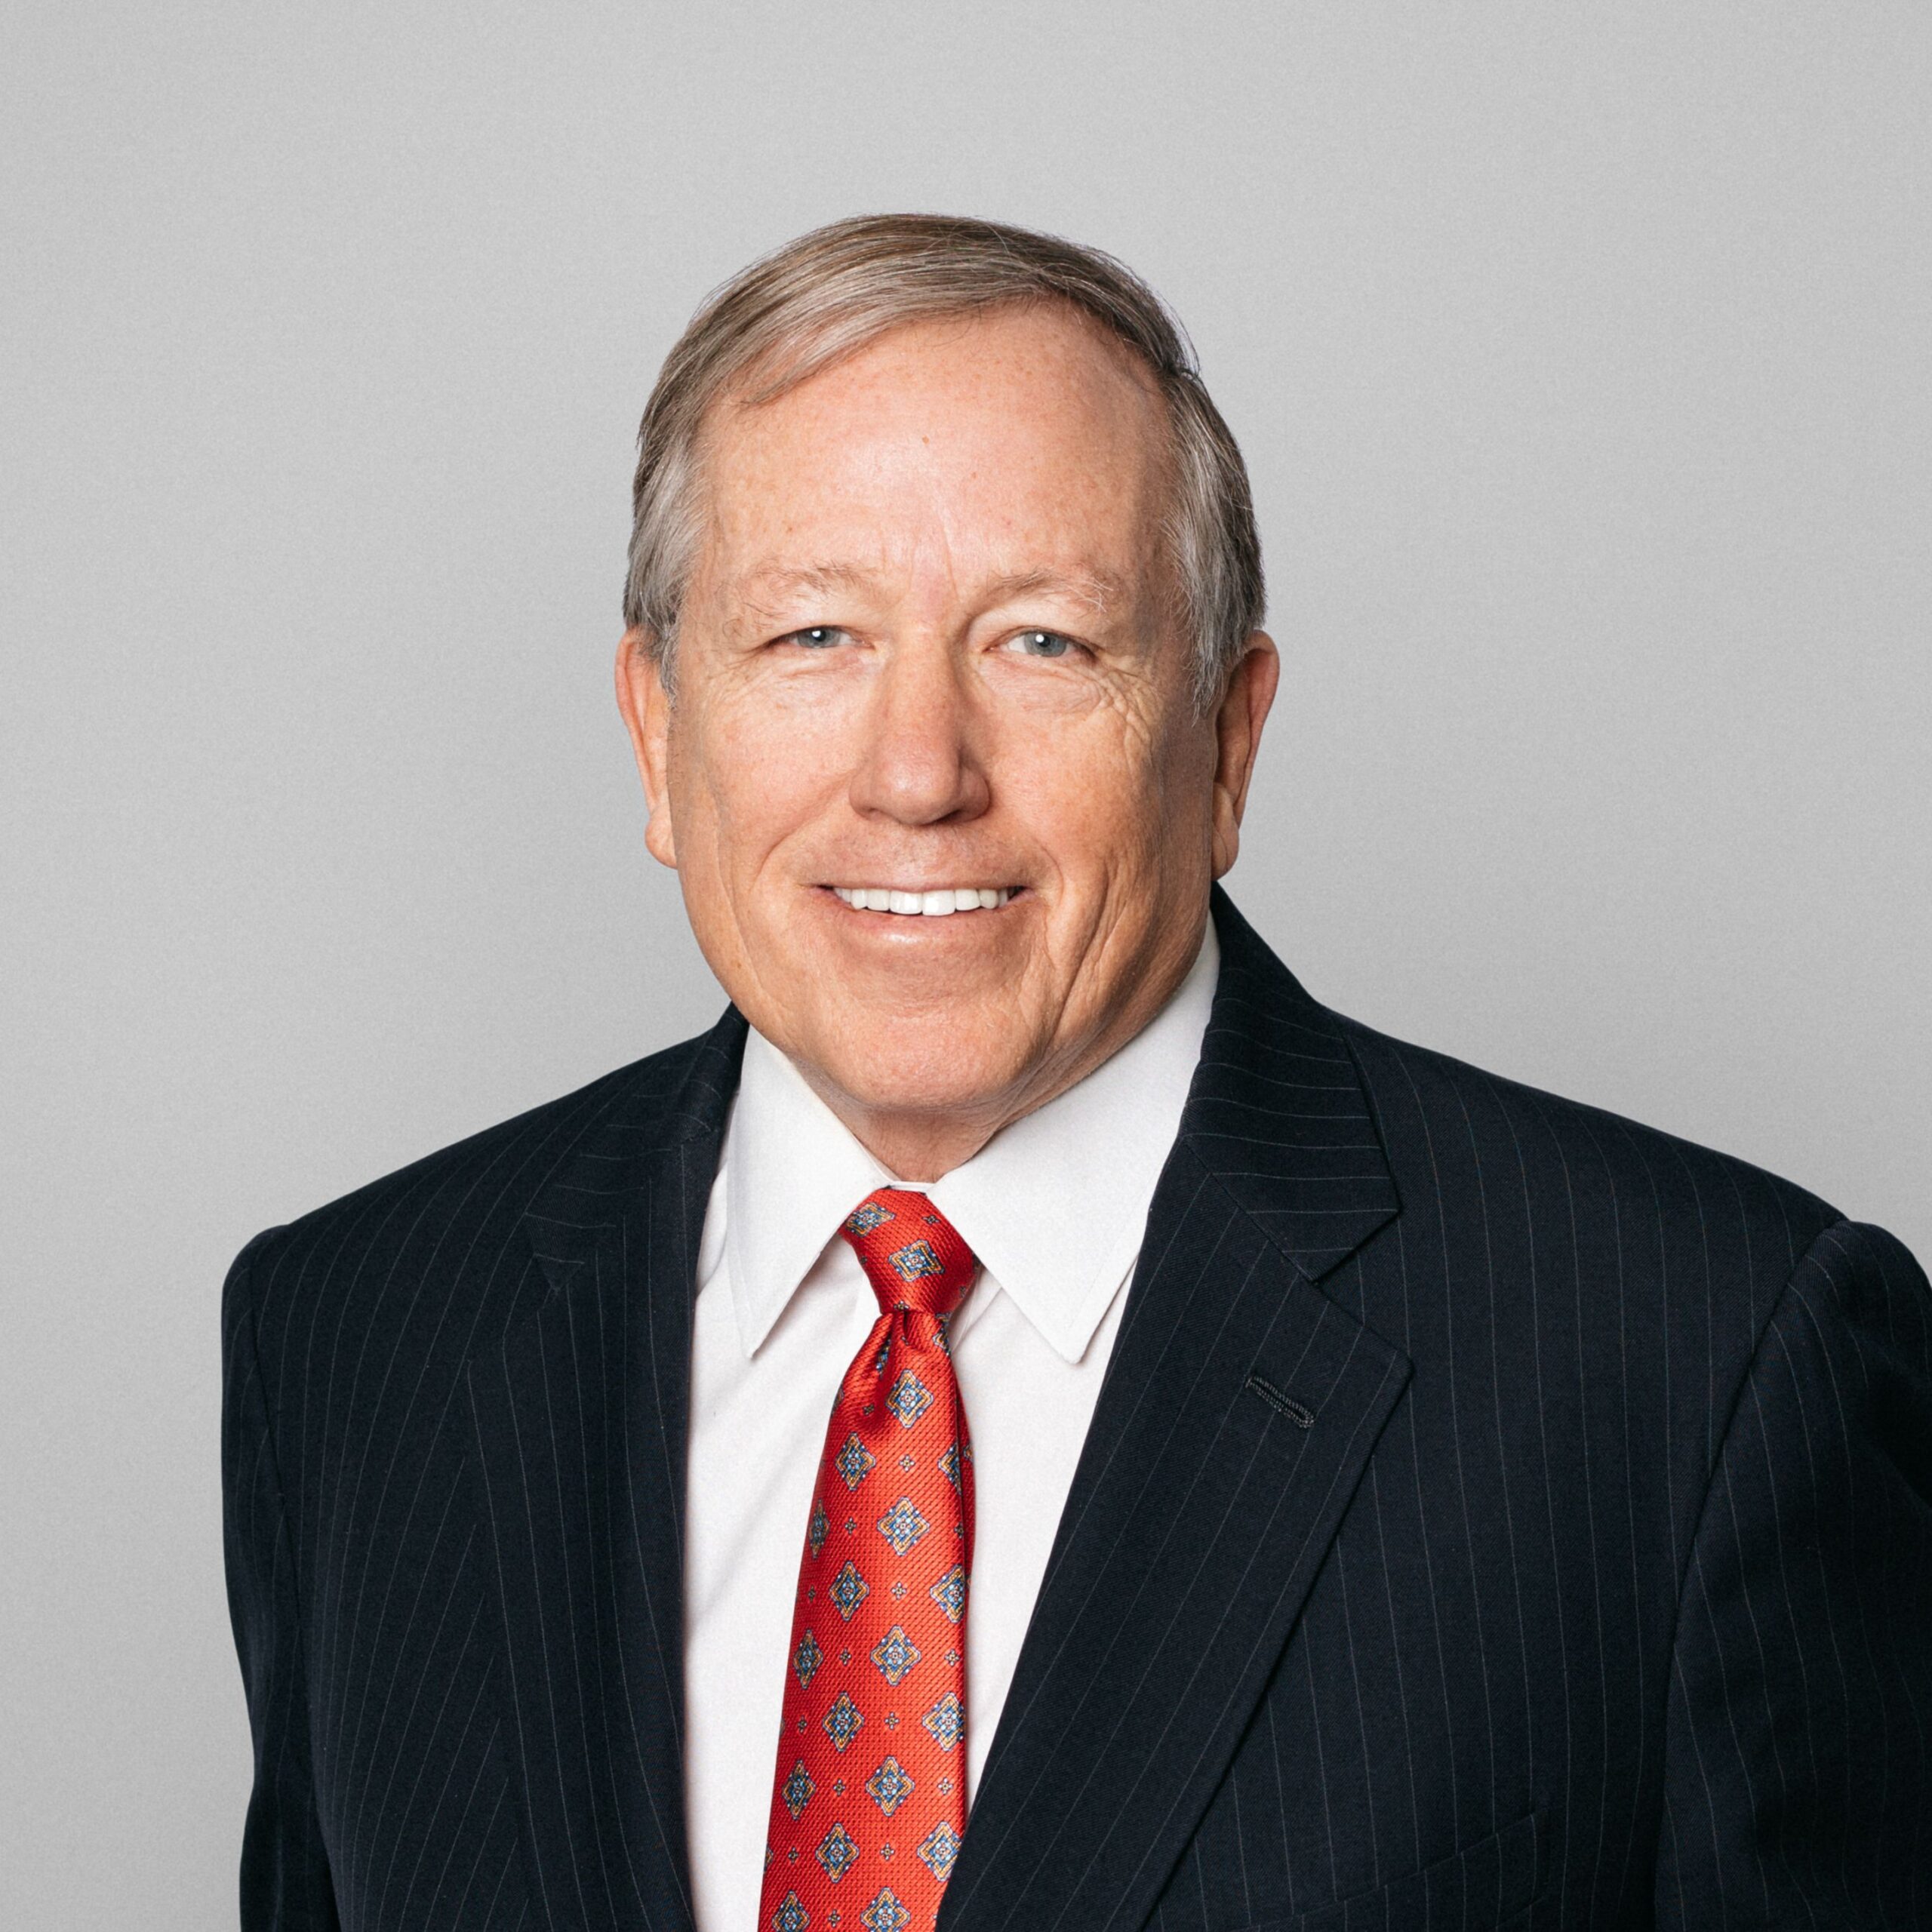 Michael K. Farrell - Chief Executive Officer